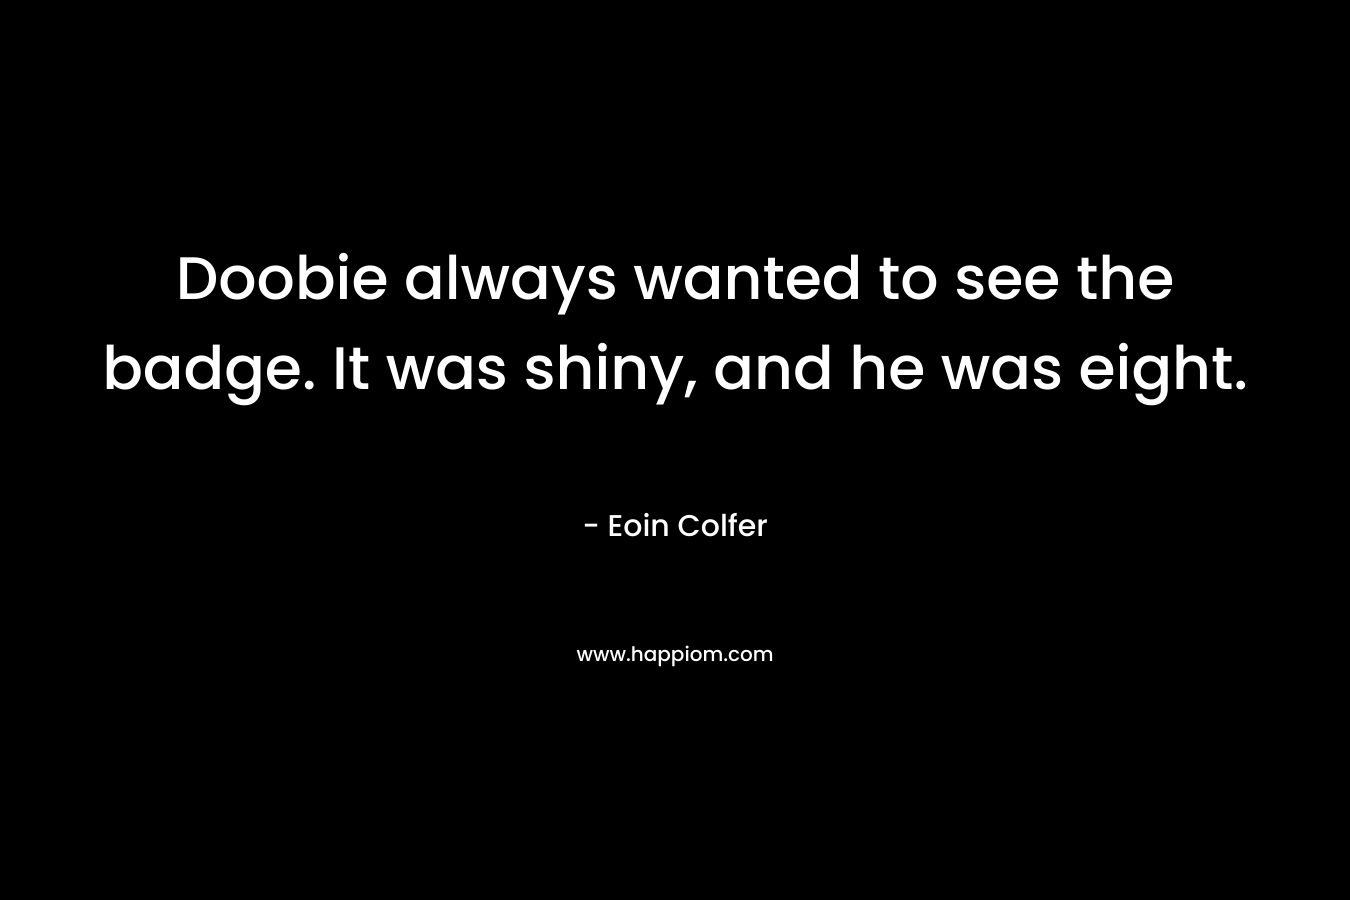 Doobie always wanted to see the badge. It was shiny, and he was eight. – Eoin Colfer